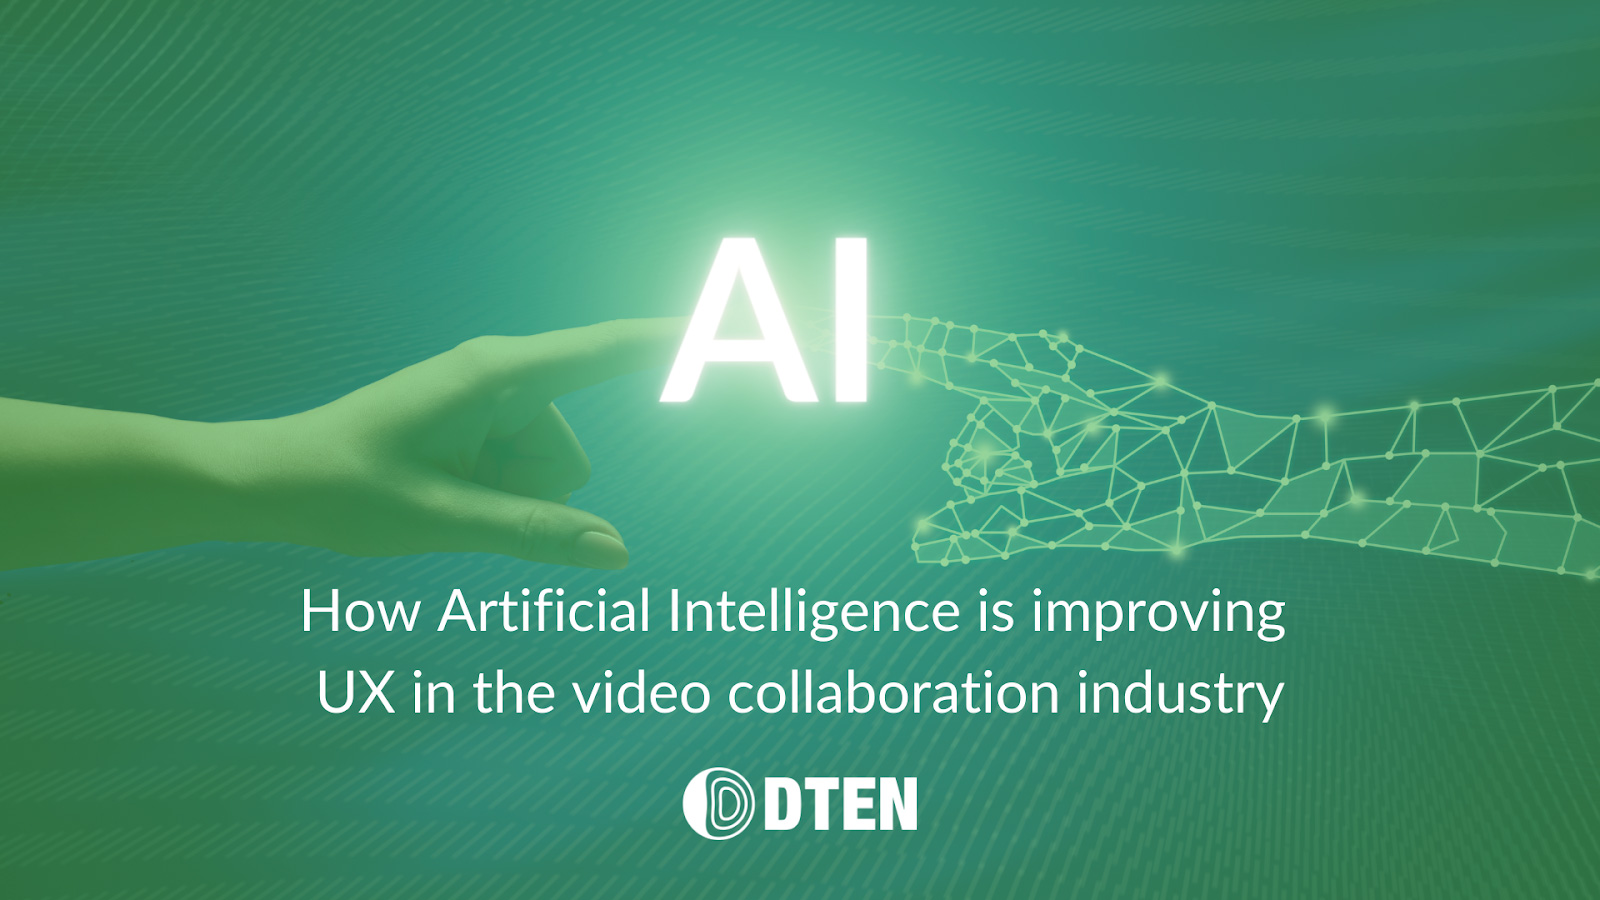 How Artificial Intelligence is Improving UX in the Video Collaboration Industry